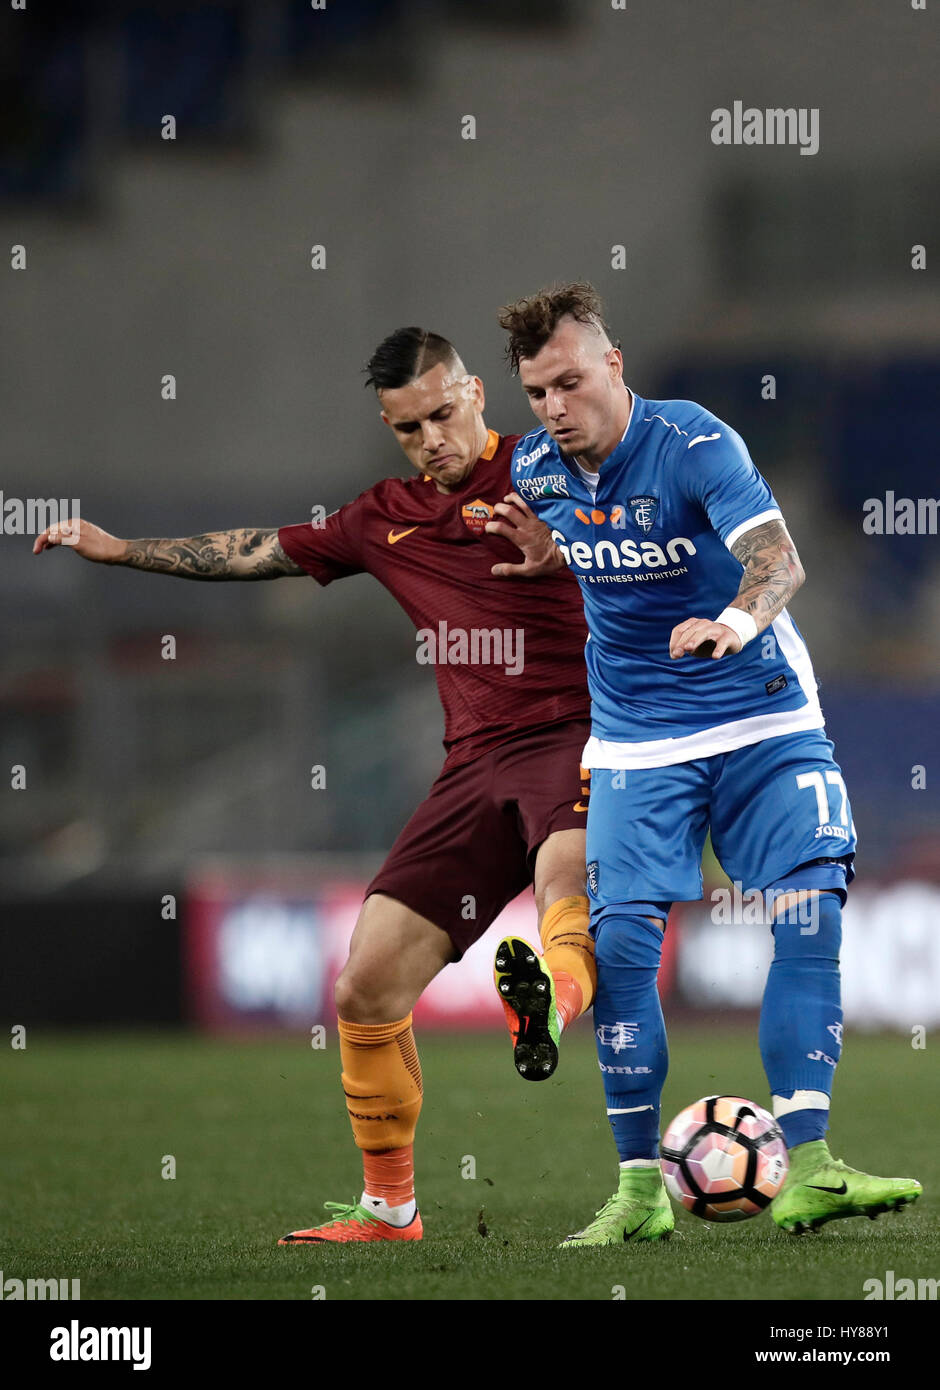 Rome, Italy. 01st Apr, 2017. Empoli Marcel Buchel, right, is challenged by Roma Leandro Paredes during the Serie A soccer match between Roma and Empoli at the Olympic stadium. Roma won 2-0. Credit: Isabella Bonotto/Pacific Press/Alamy Live News Stock Photo